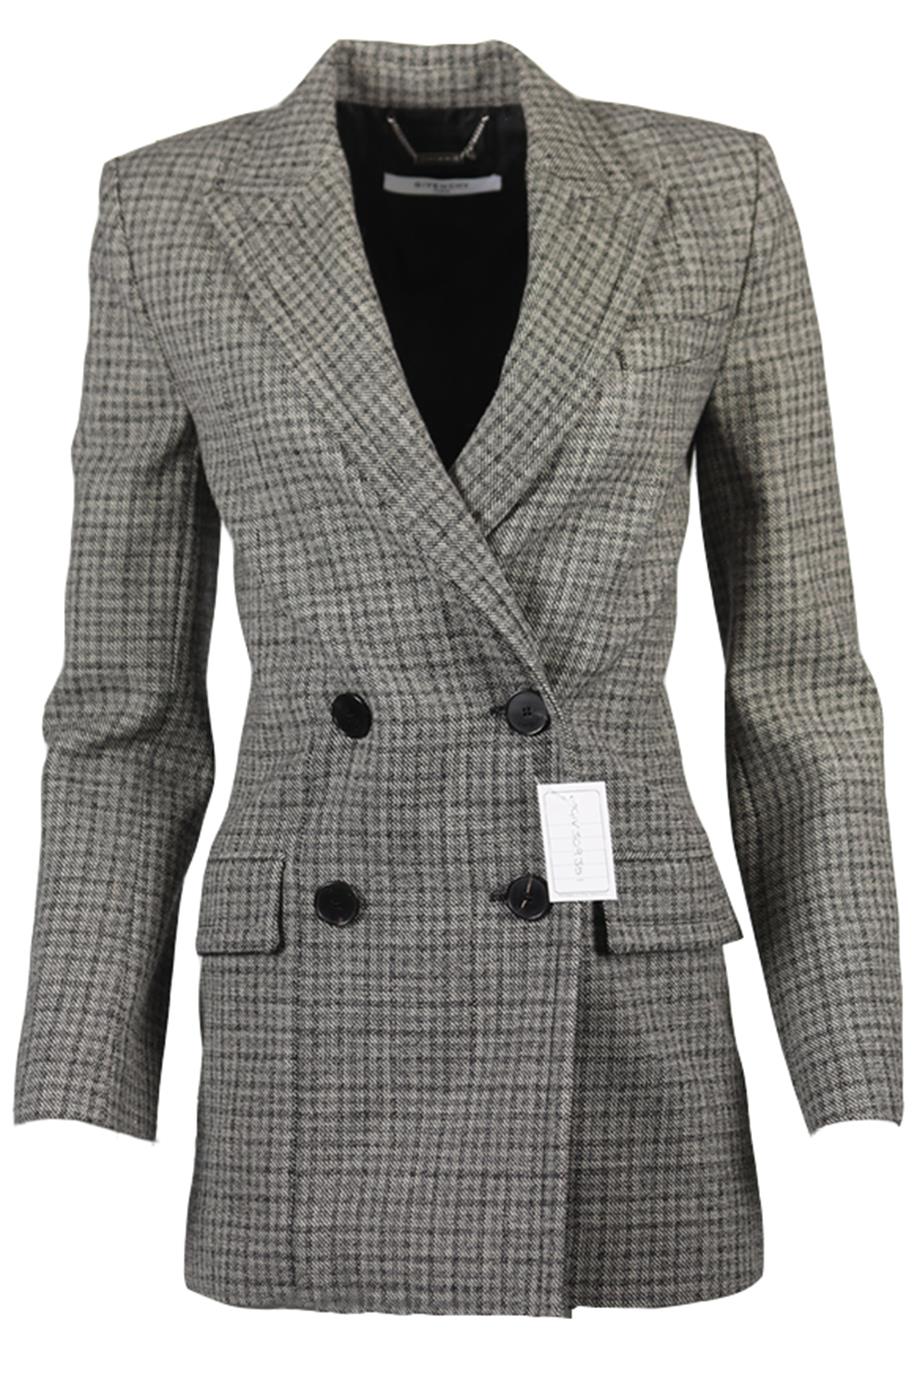 GIVENCHY DOUBLE BREASTED WOOL BLAZER FR 34 UK 6